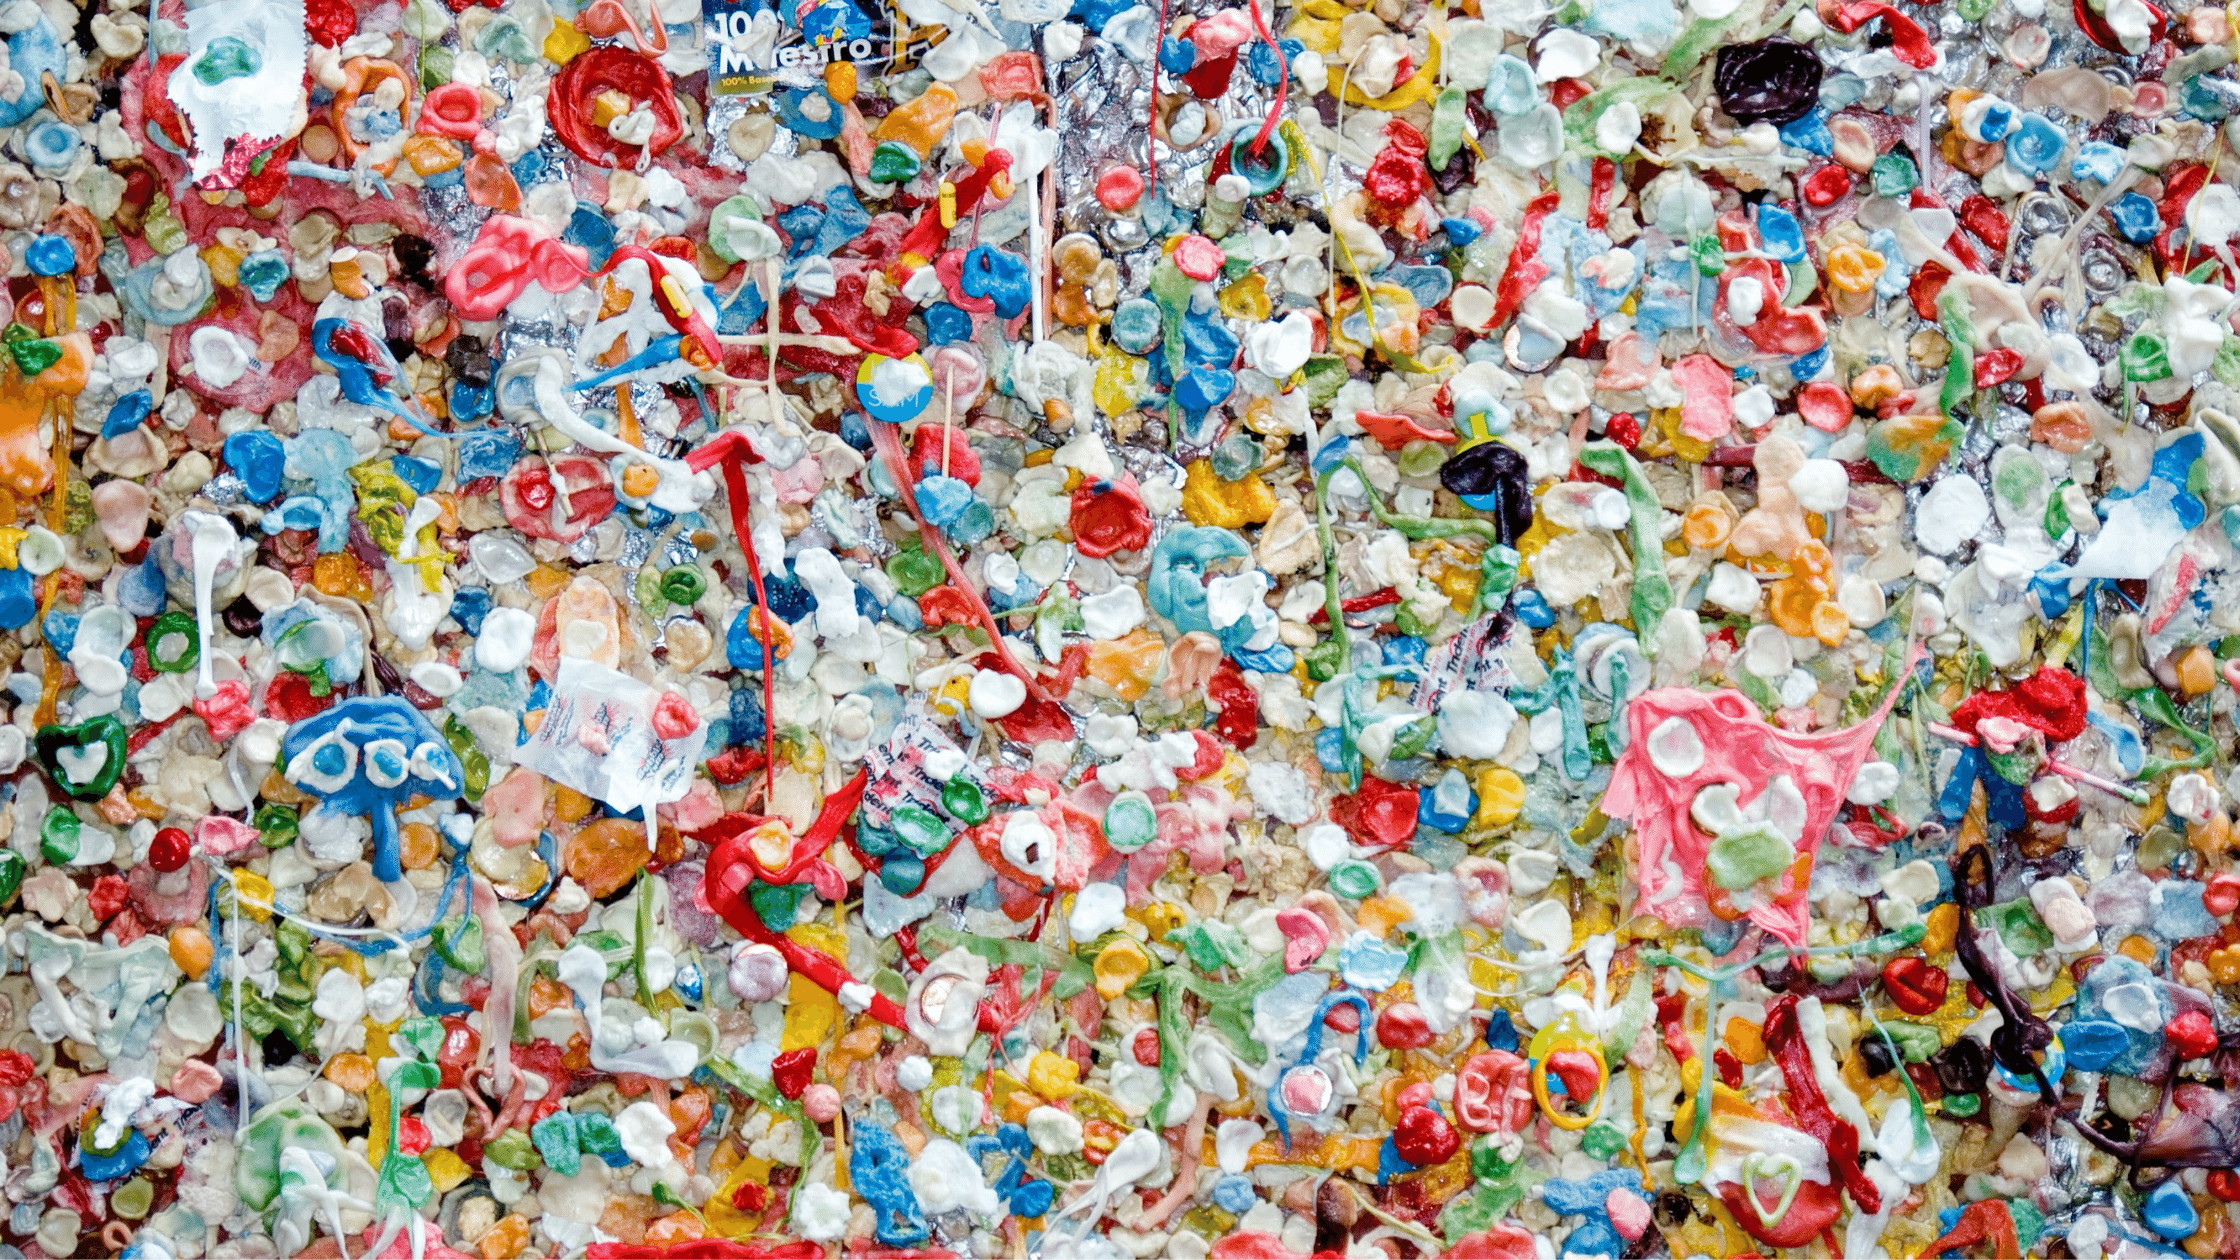 Plastics for recycling